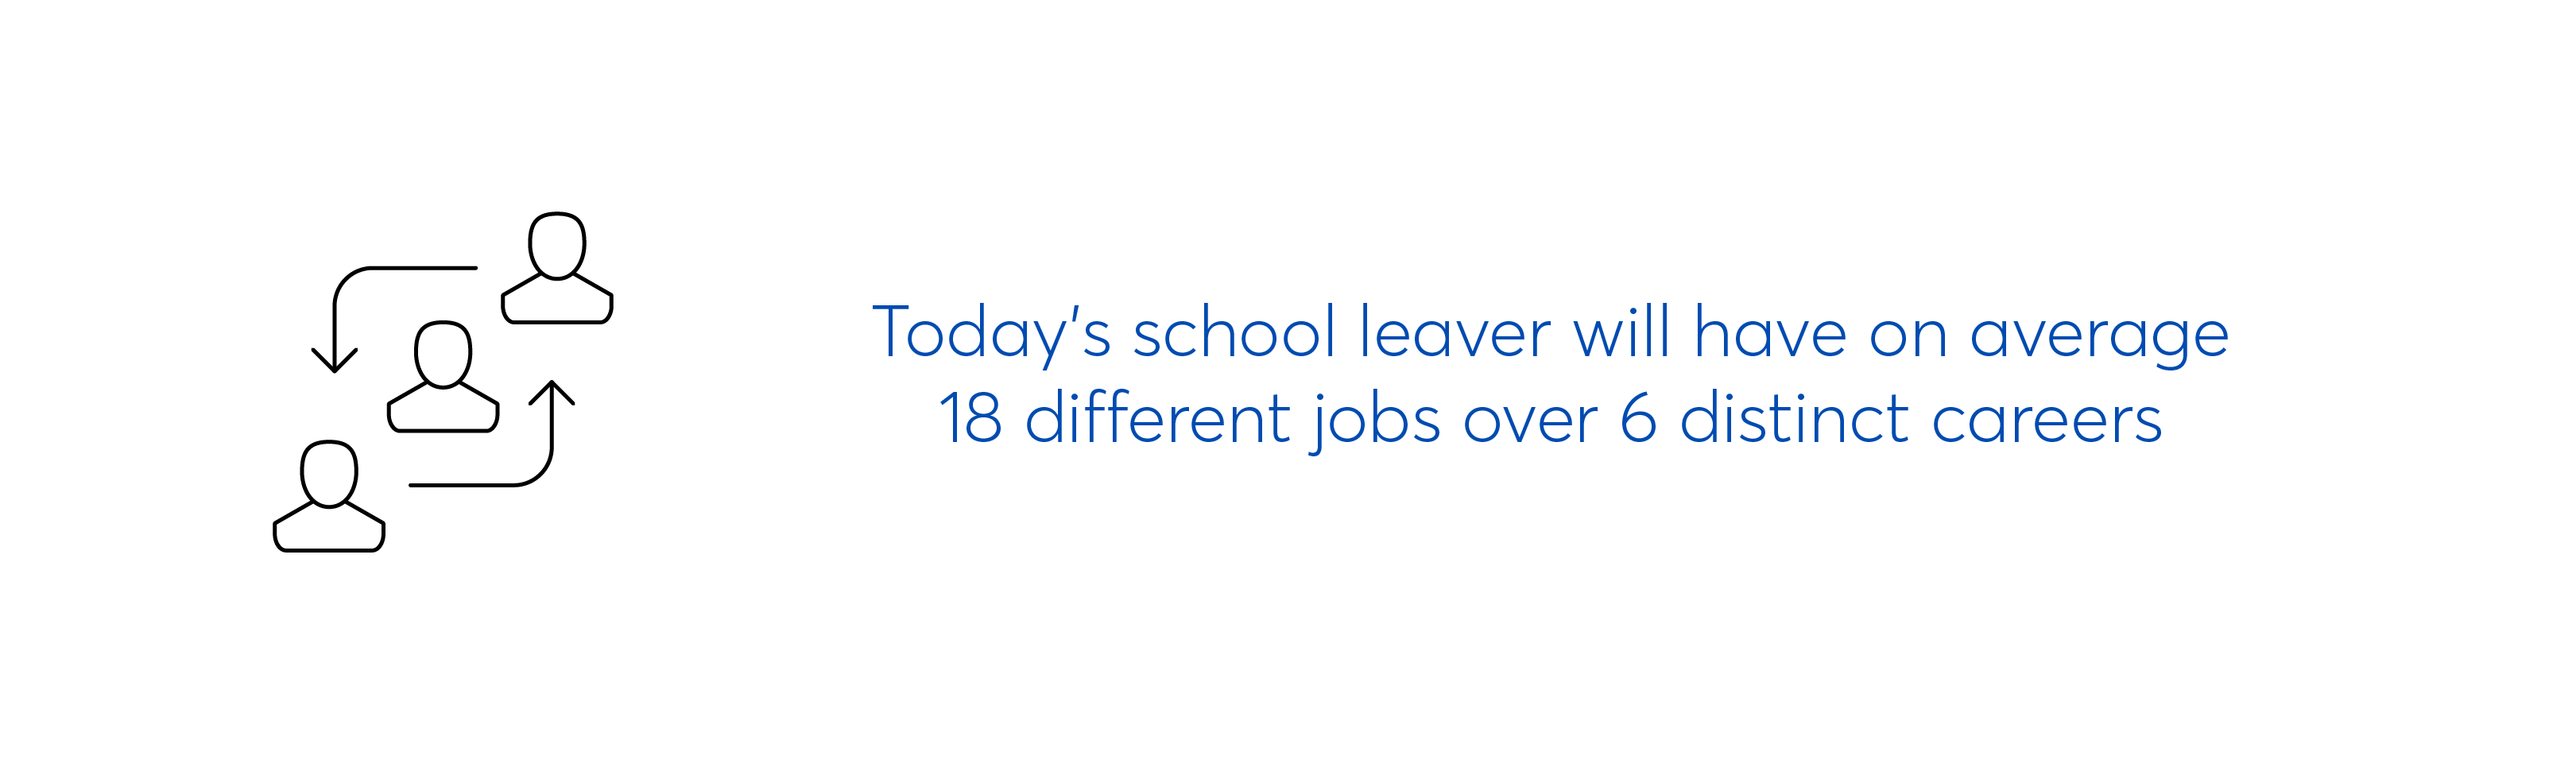 School leavers will have 18 jobs over 6 different careers